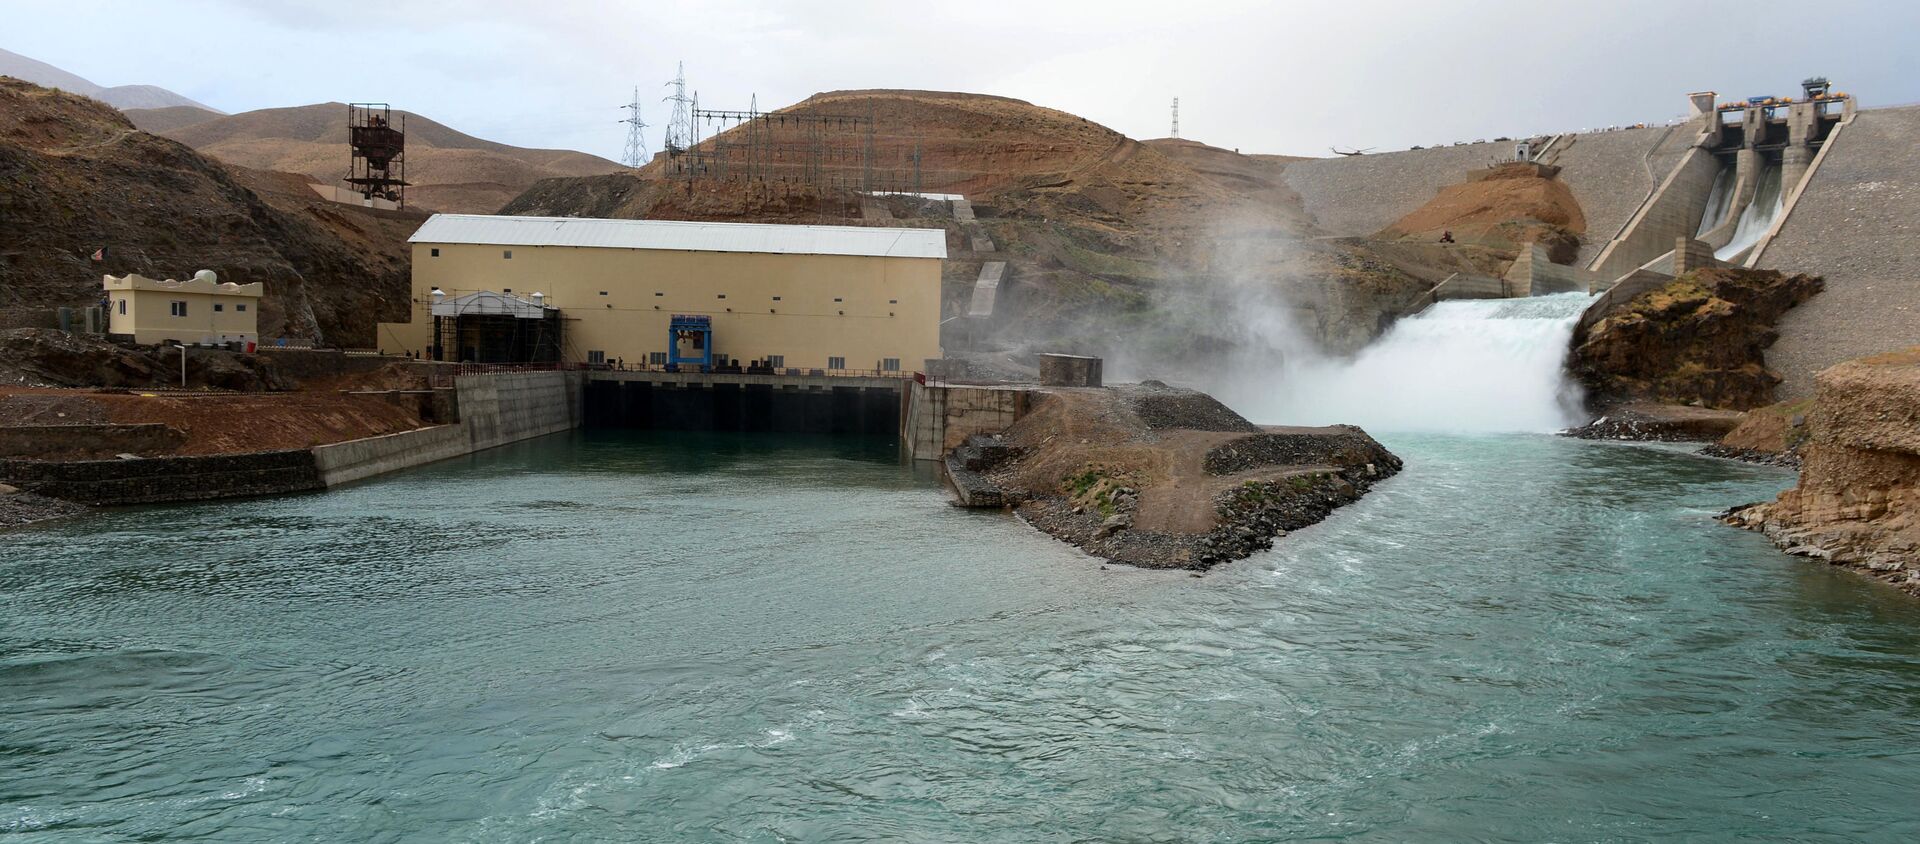 In this photograph taken on 2 June 2016, the Salma Hydroelectric Dam is seen at Chishti Sharif in Afghanistan's Herat province. - Sputnik International, 1920, 13.08.2021